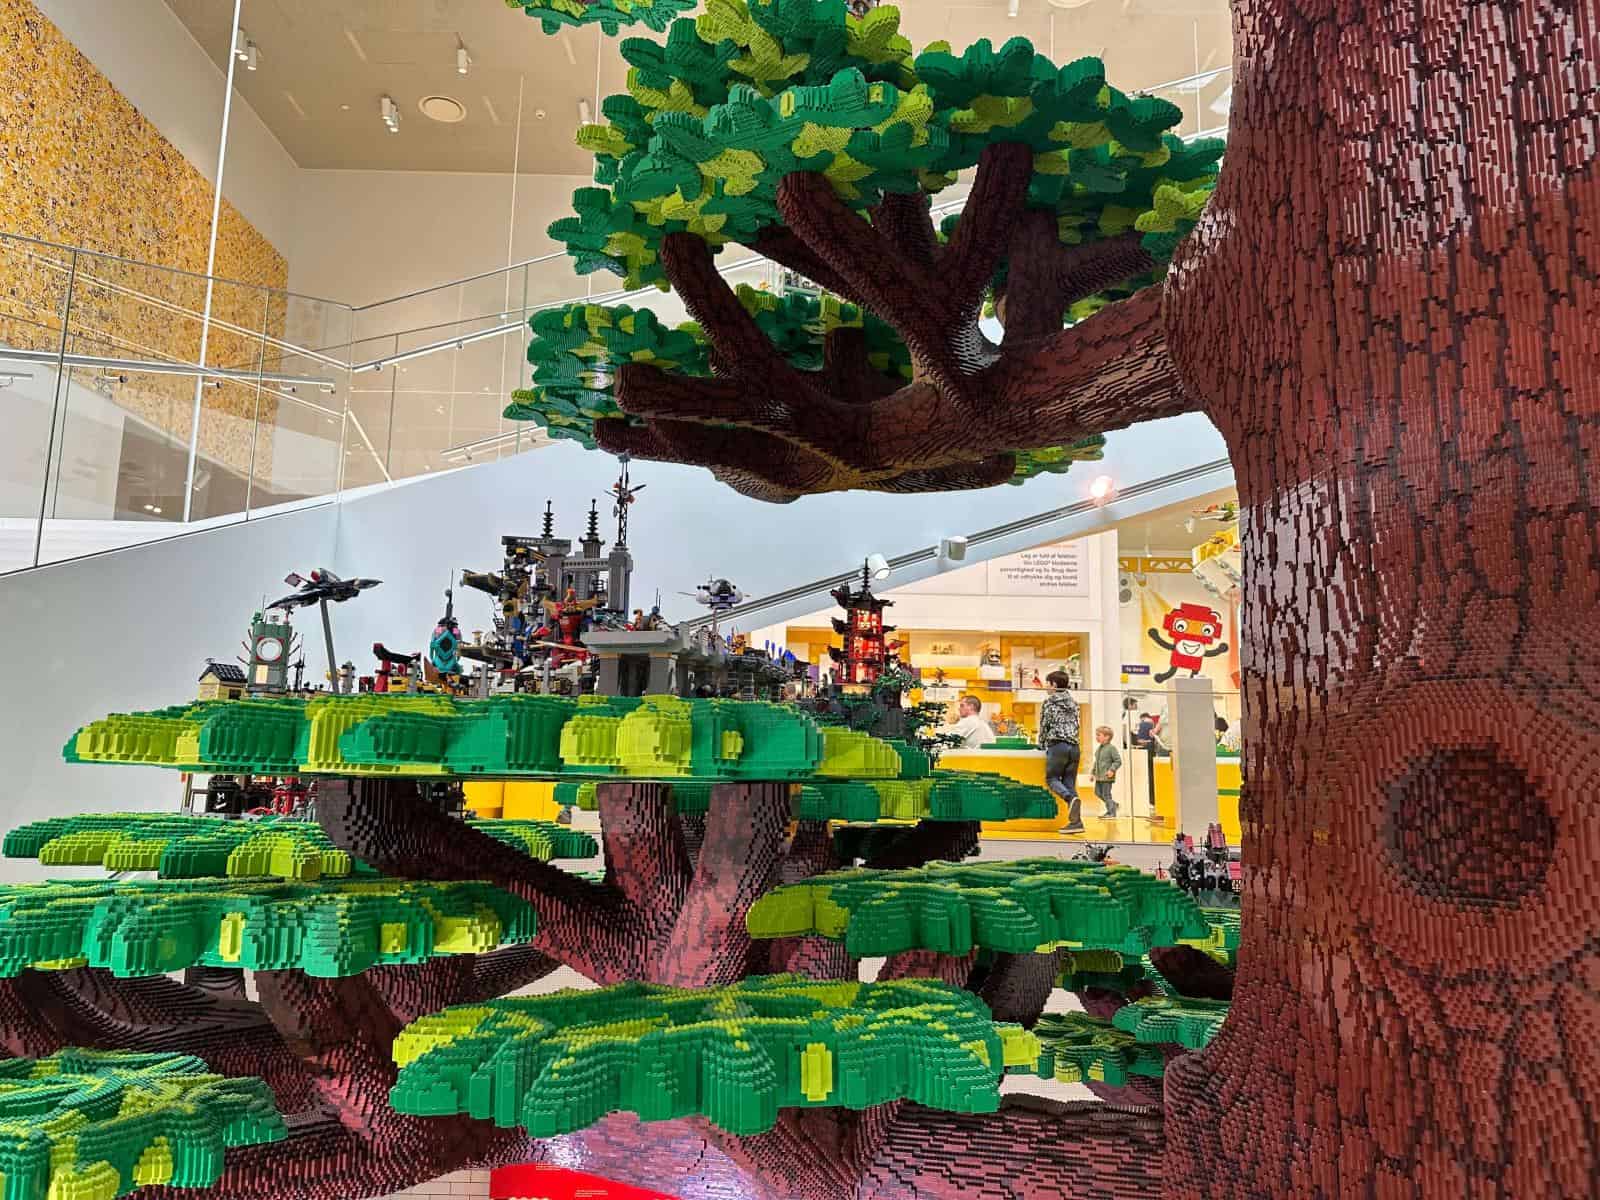 Giant tree sculpture made from Lego